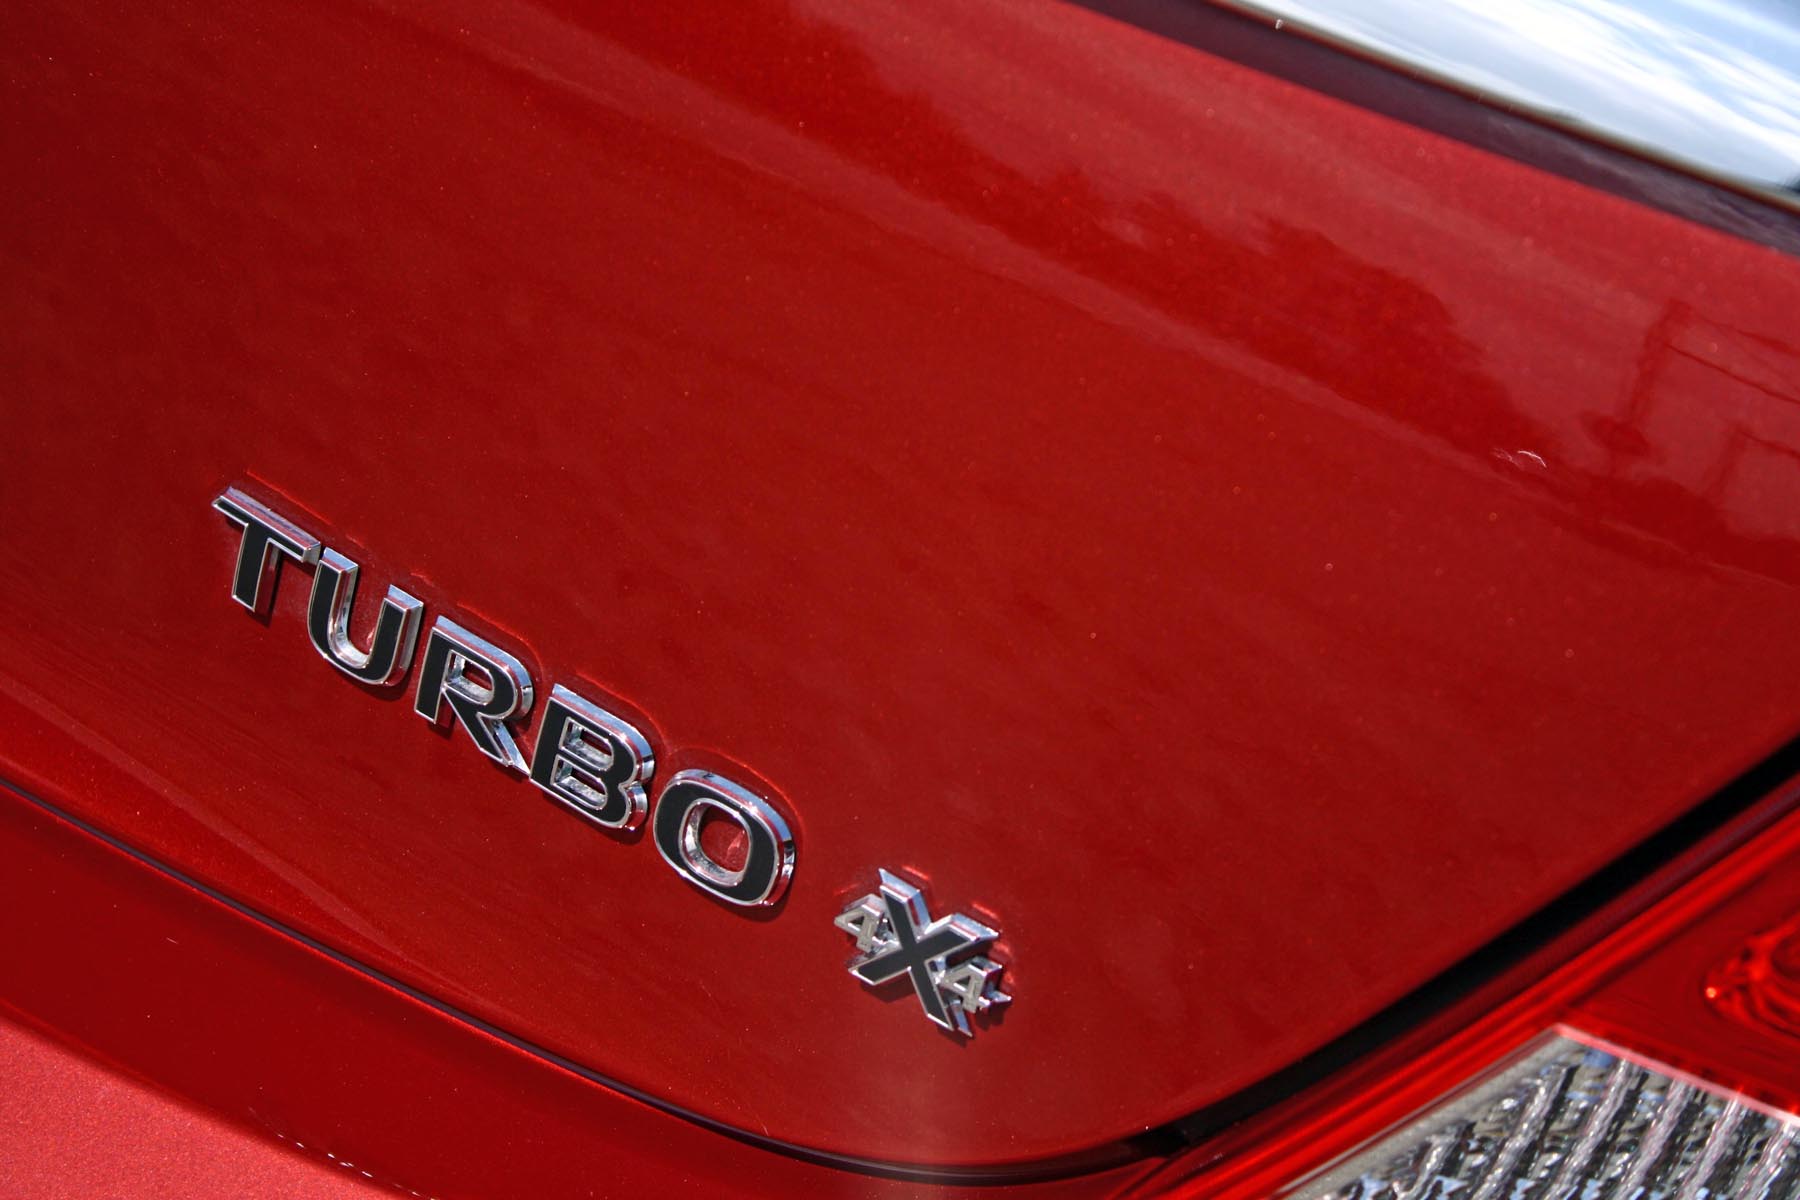 Turbo si 4x4, emblematice